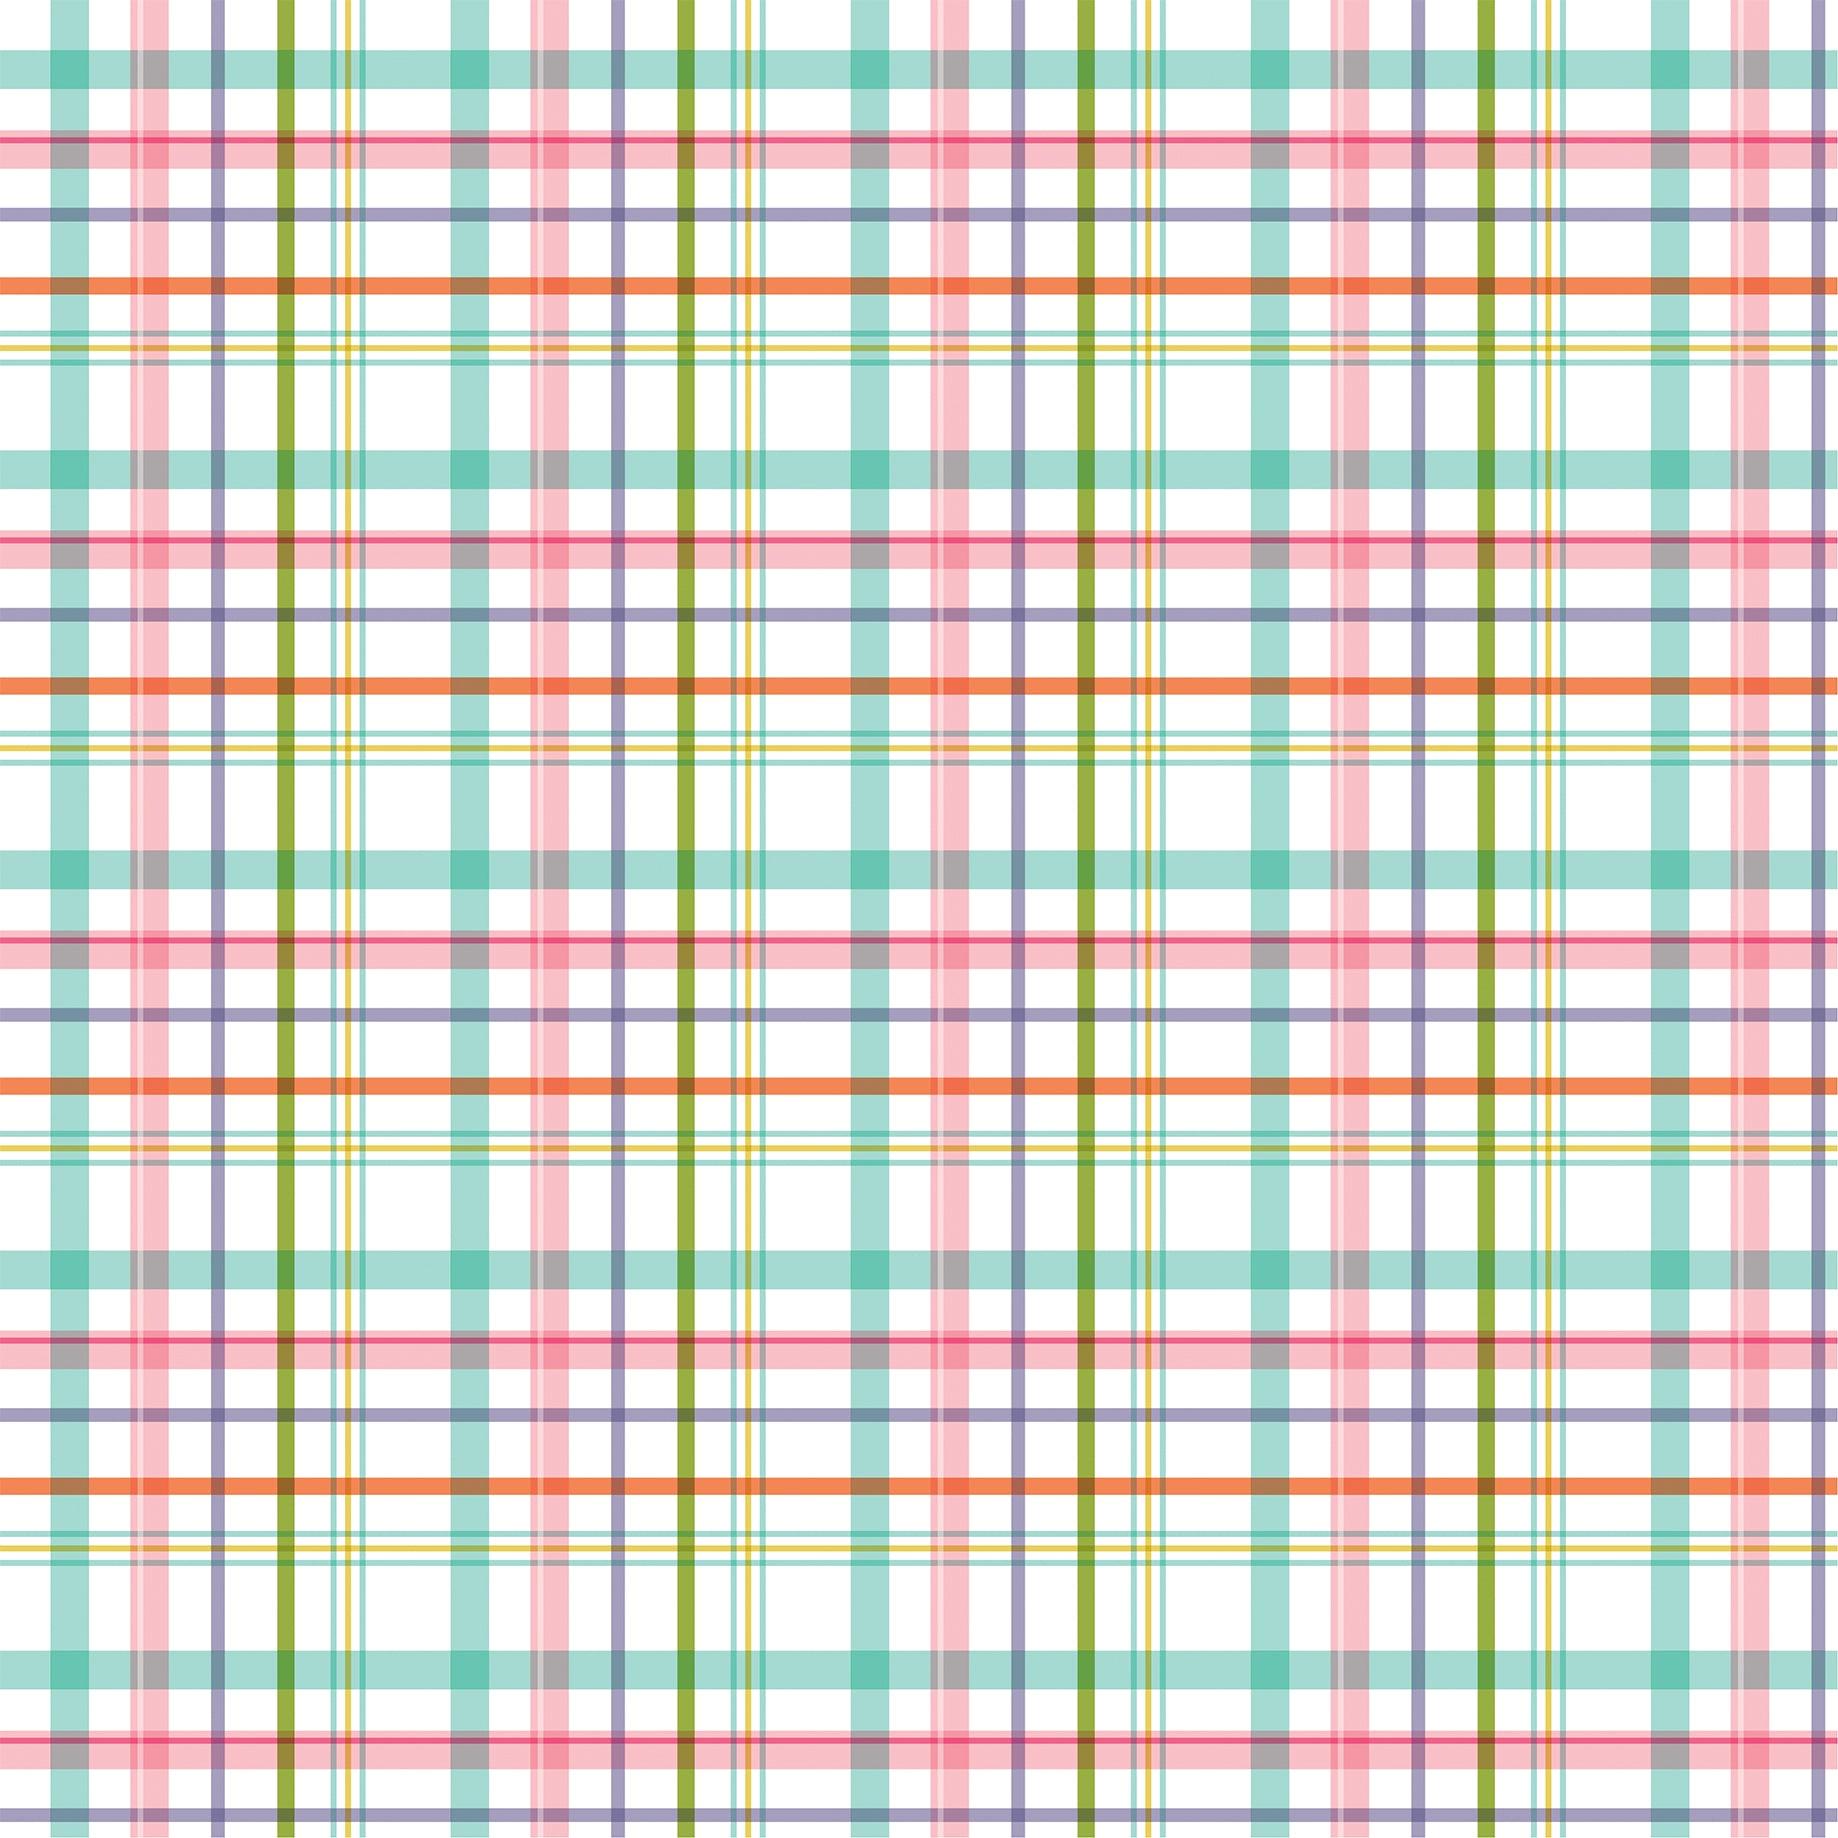 All About A Girl Collection Playful Plaid 12 x 12 Double-Sided Scrapbook Paper by Echo Park Paper - Scrapbook Supply Companies